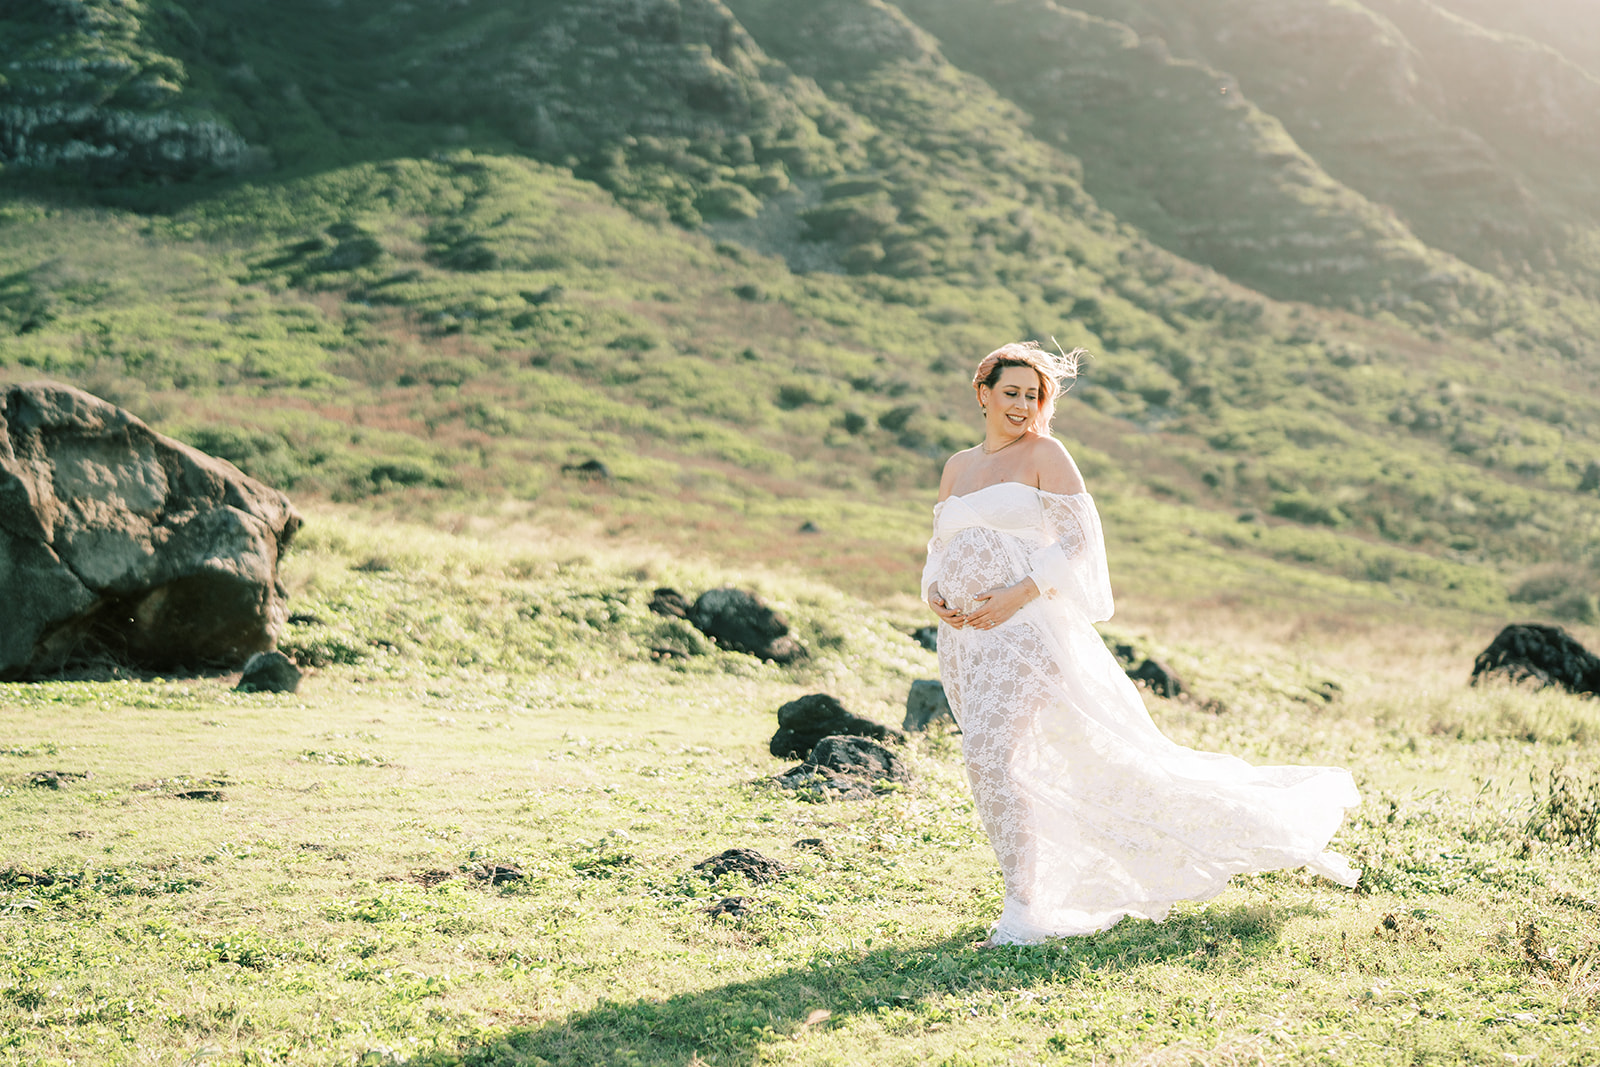 A pregnant woman in a white lace dress holding her baby bump in a sunny, grassy field with hills.